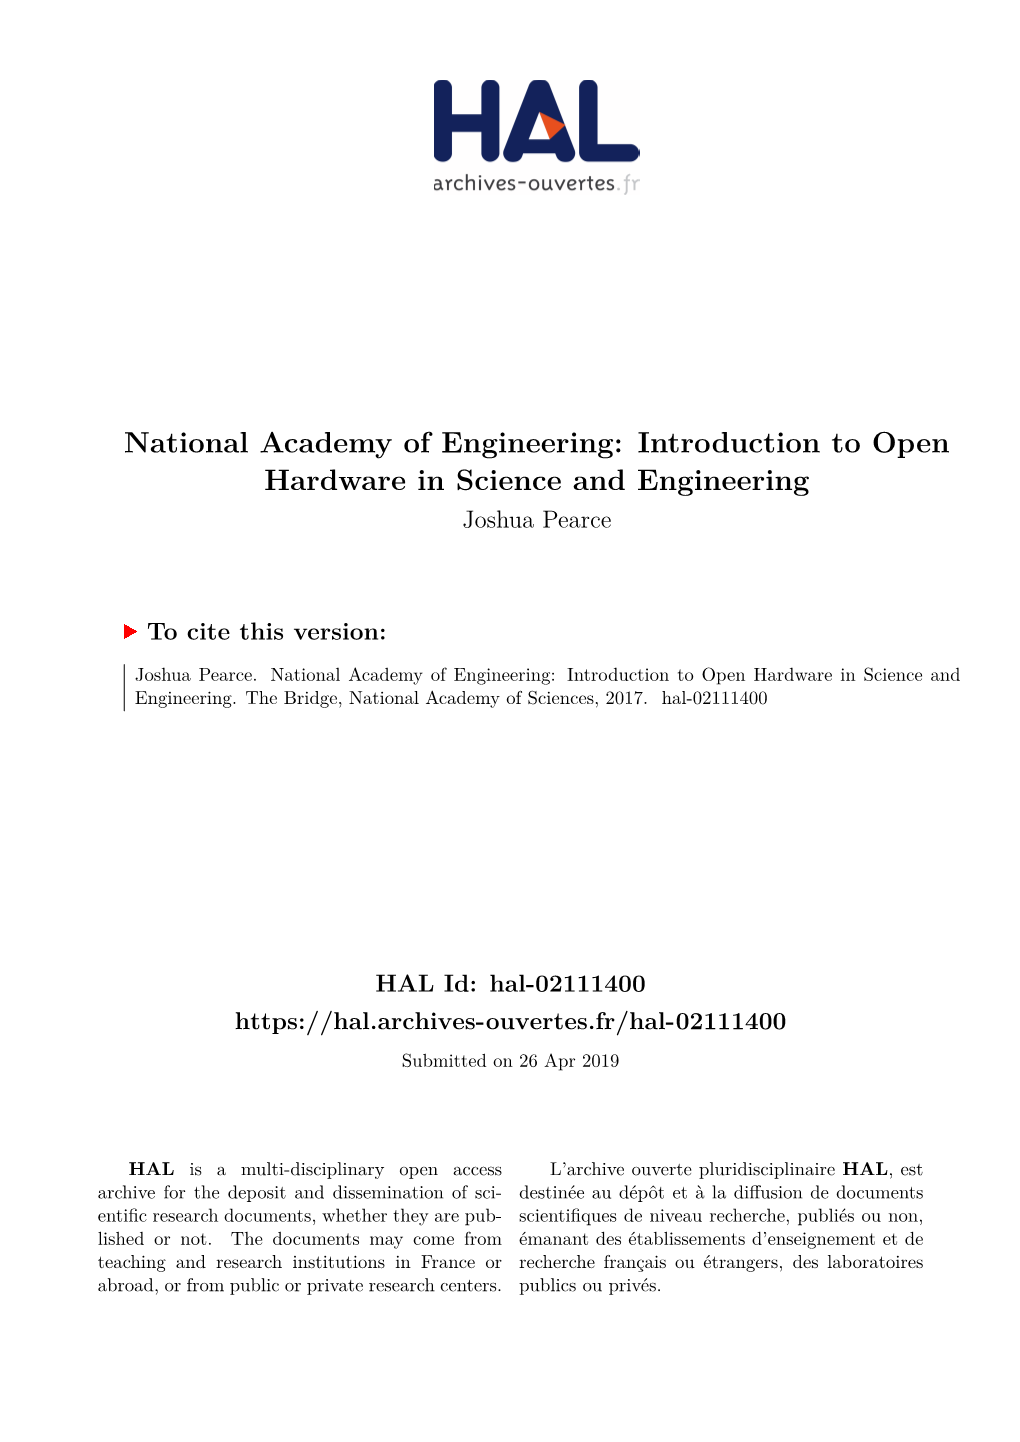 National Academy of Engineering: Introduction to Open Hardware in Science and Engineering Joshua Pearce